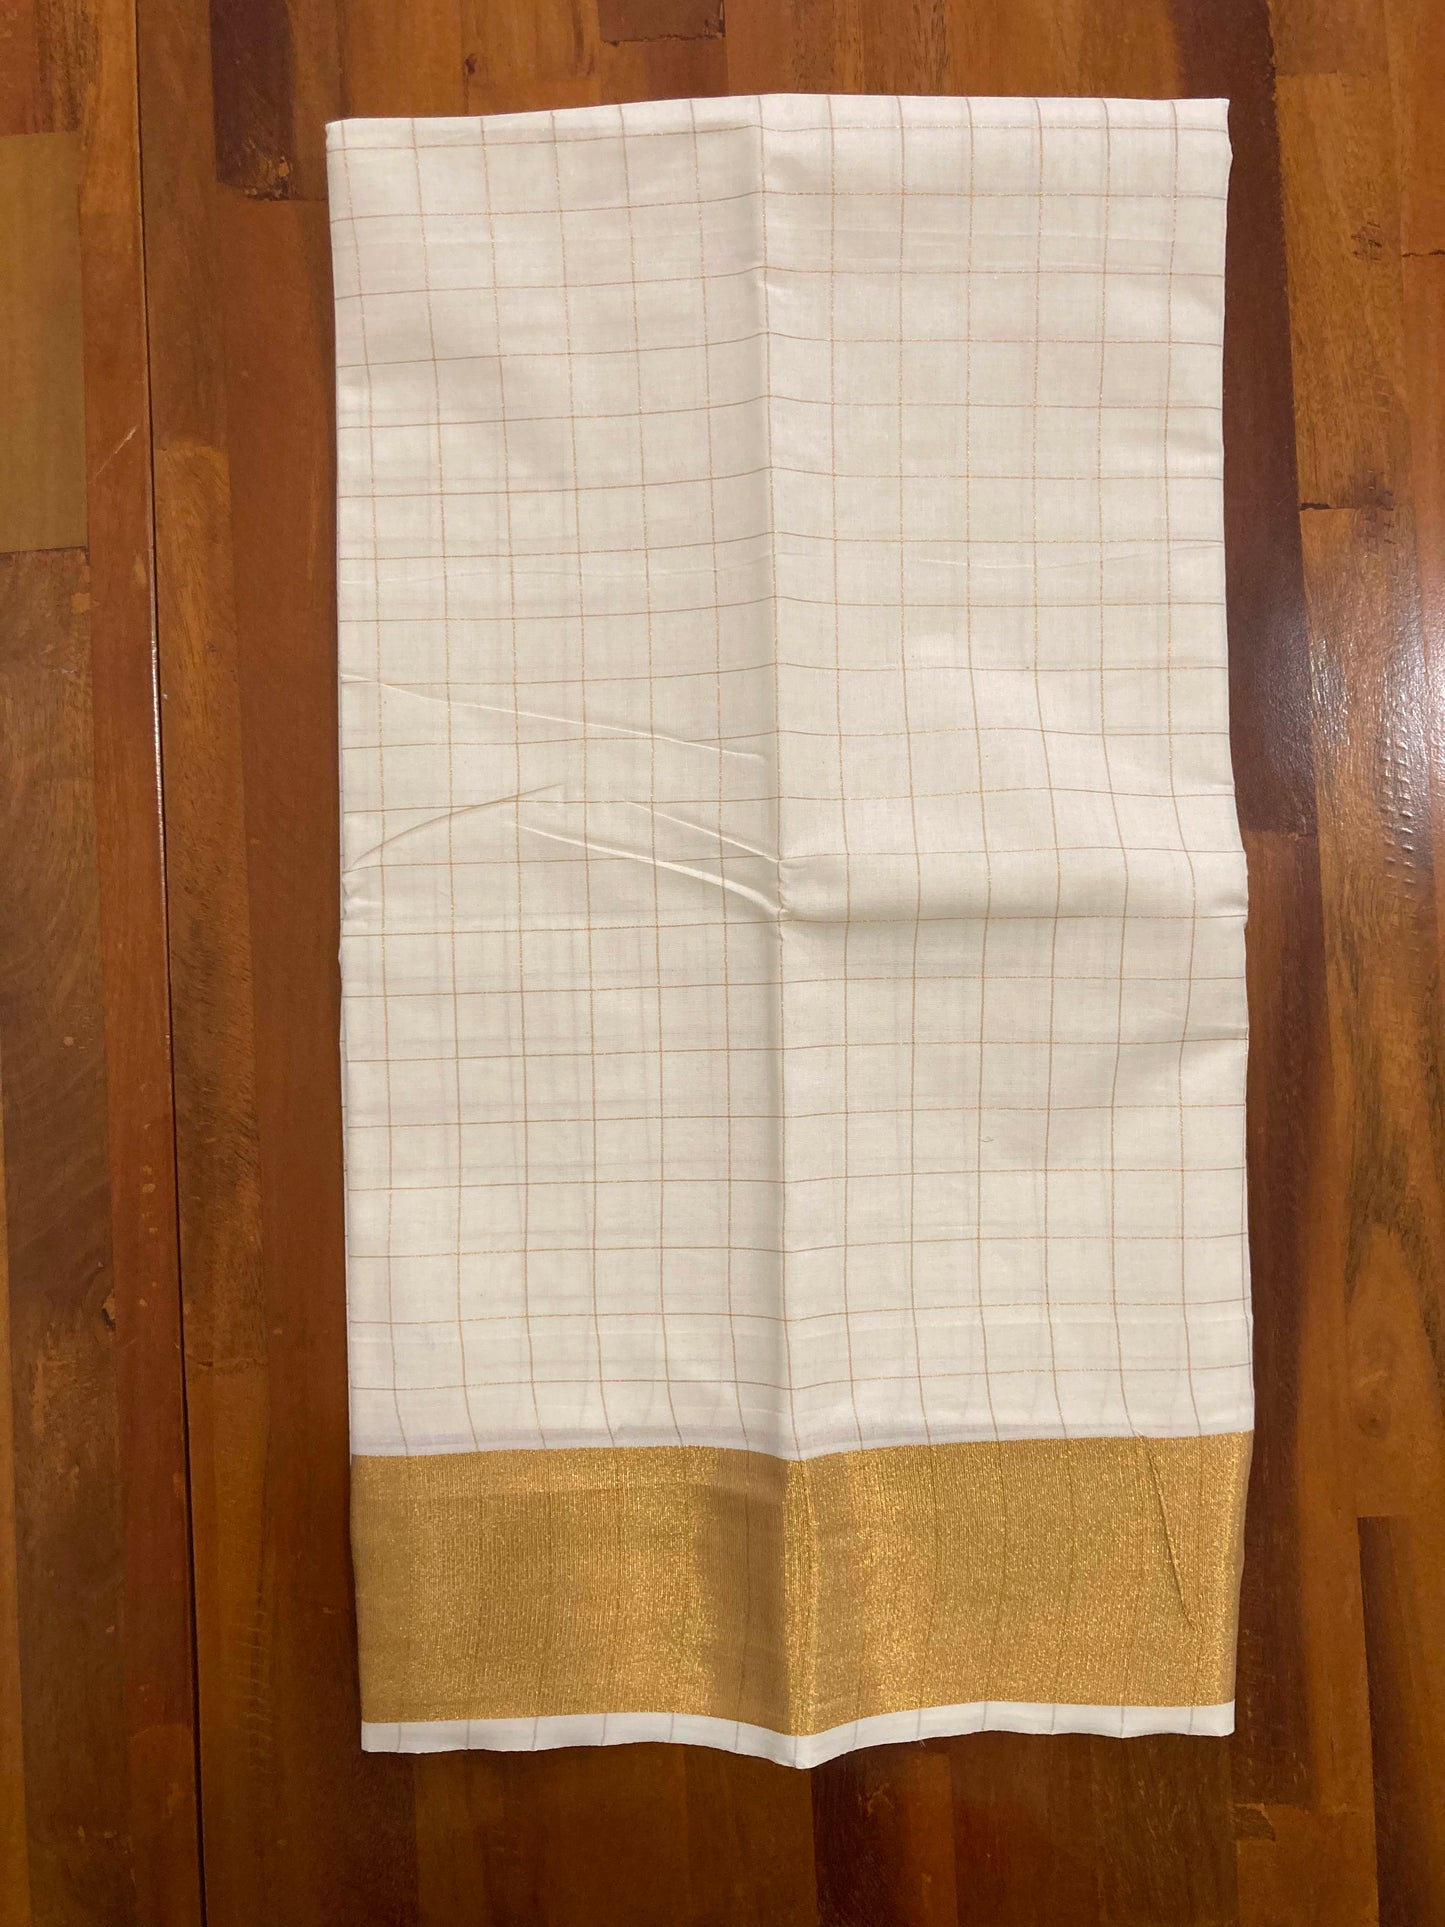 Kerala Cotton Material with Kasavu Border with Check Woven Design (4 meters)